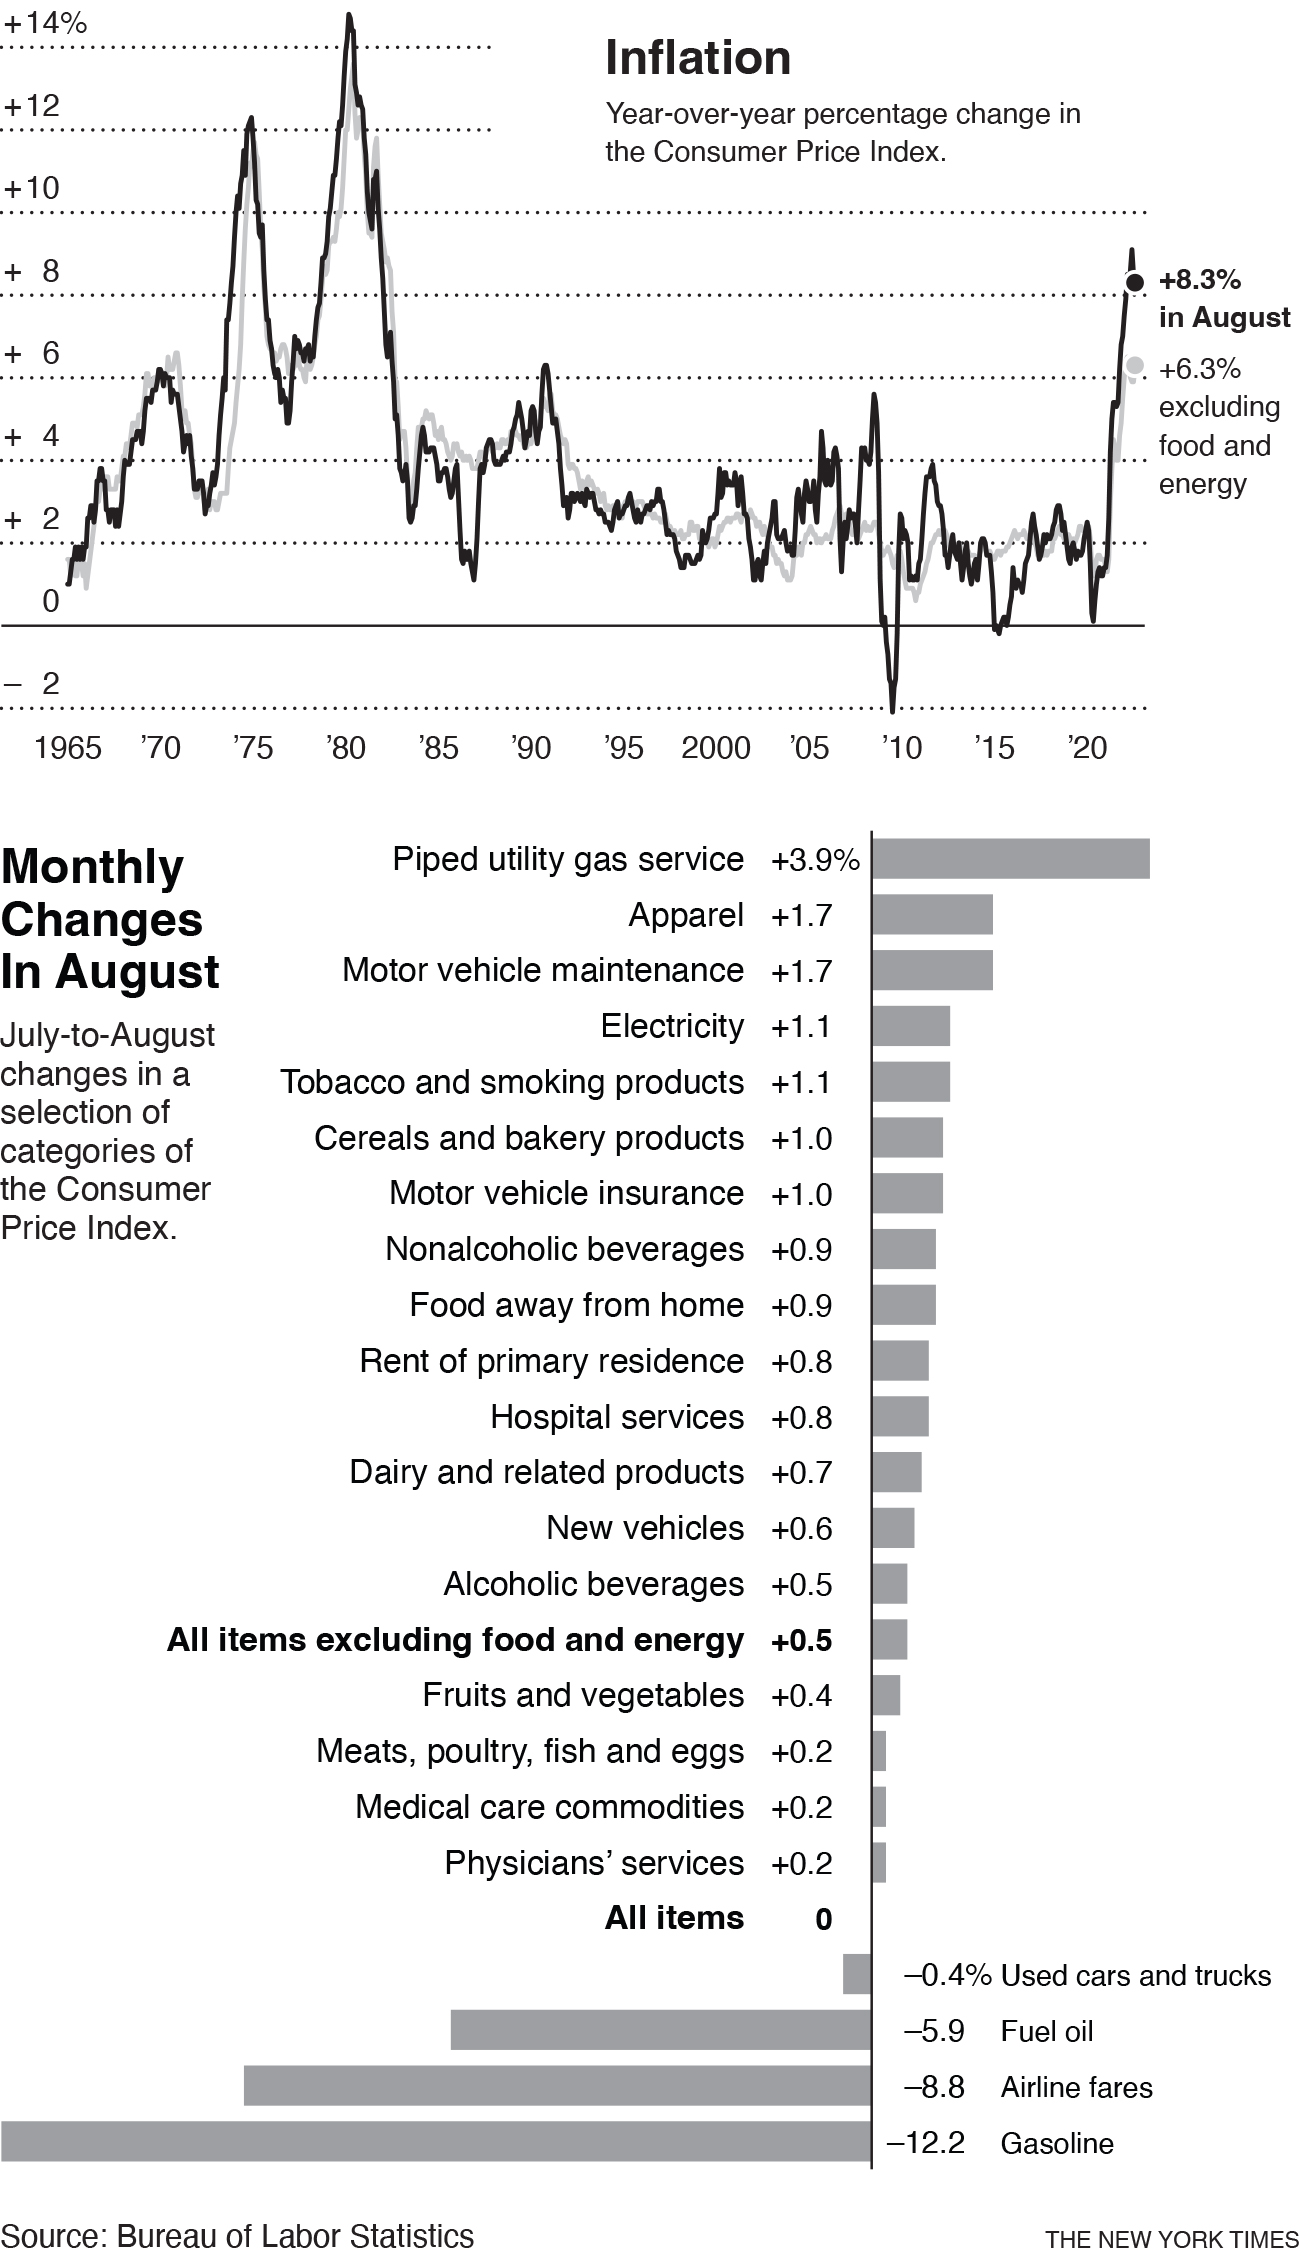 new-inflation-developments-are-rattling-markets-and-economists-heres-why1